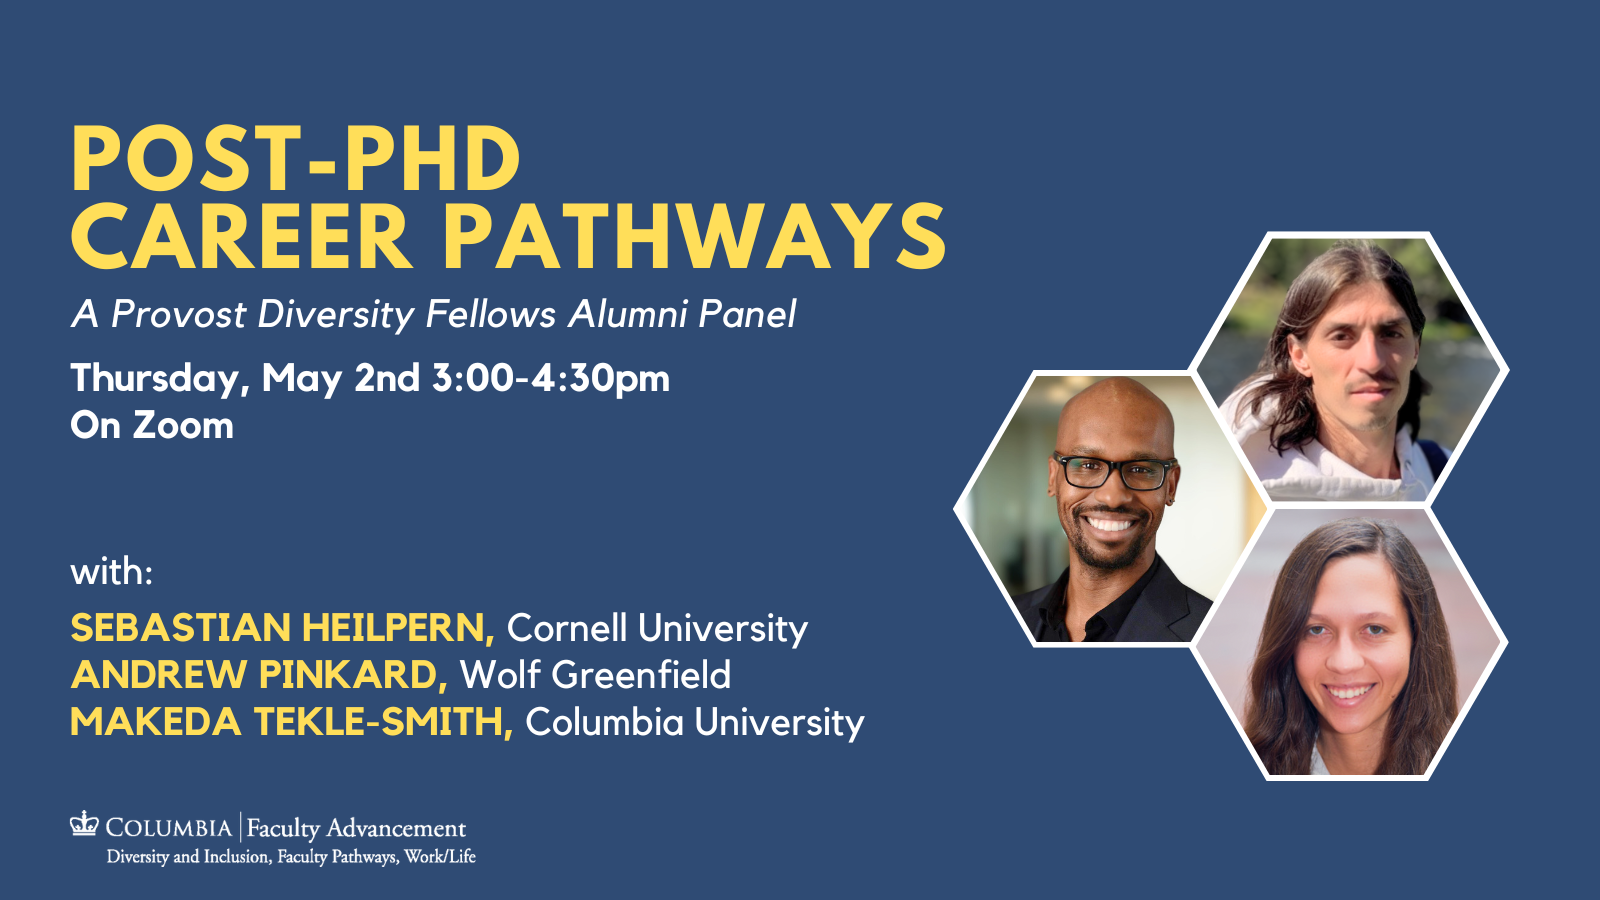 Provost Diversity Fellow Panel and Reception Flyer with blue background and panelists' headshots